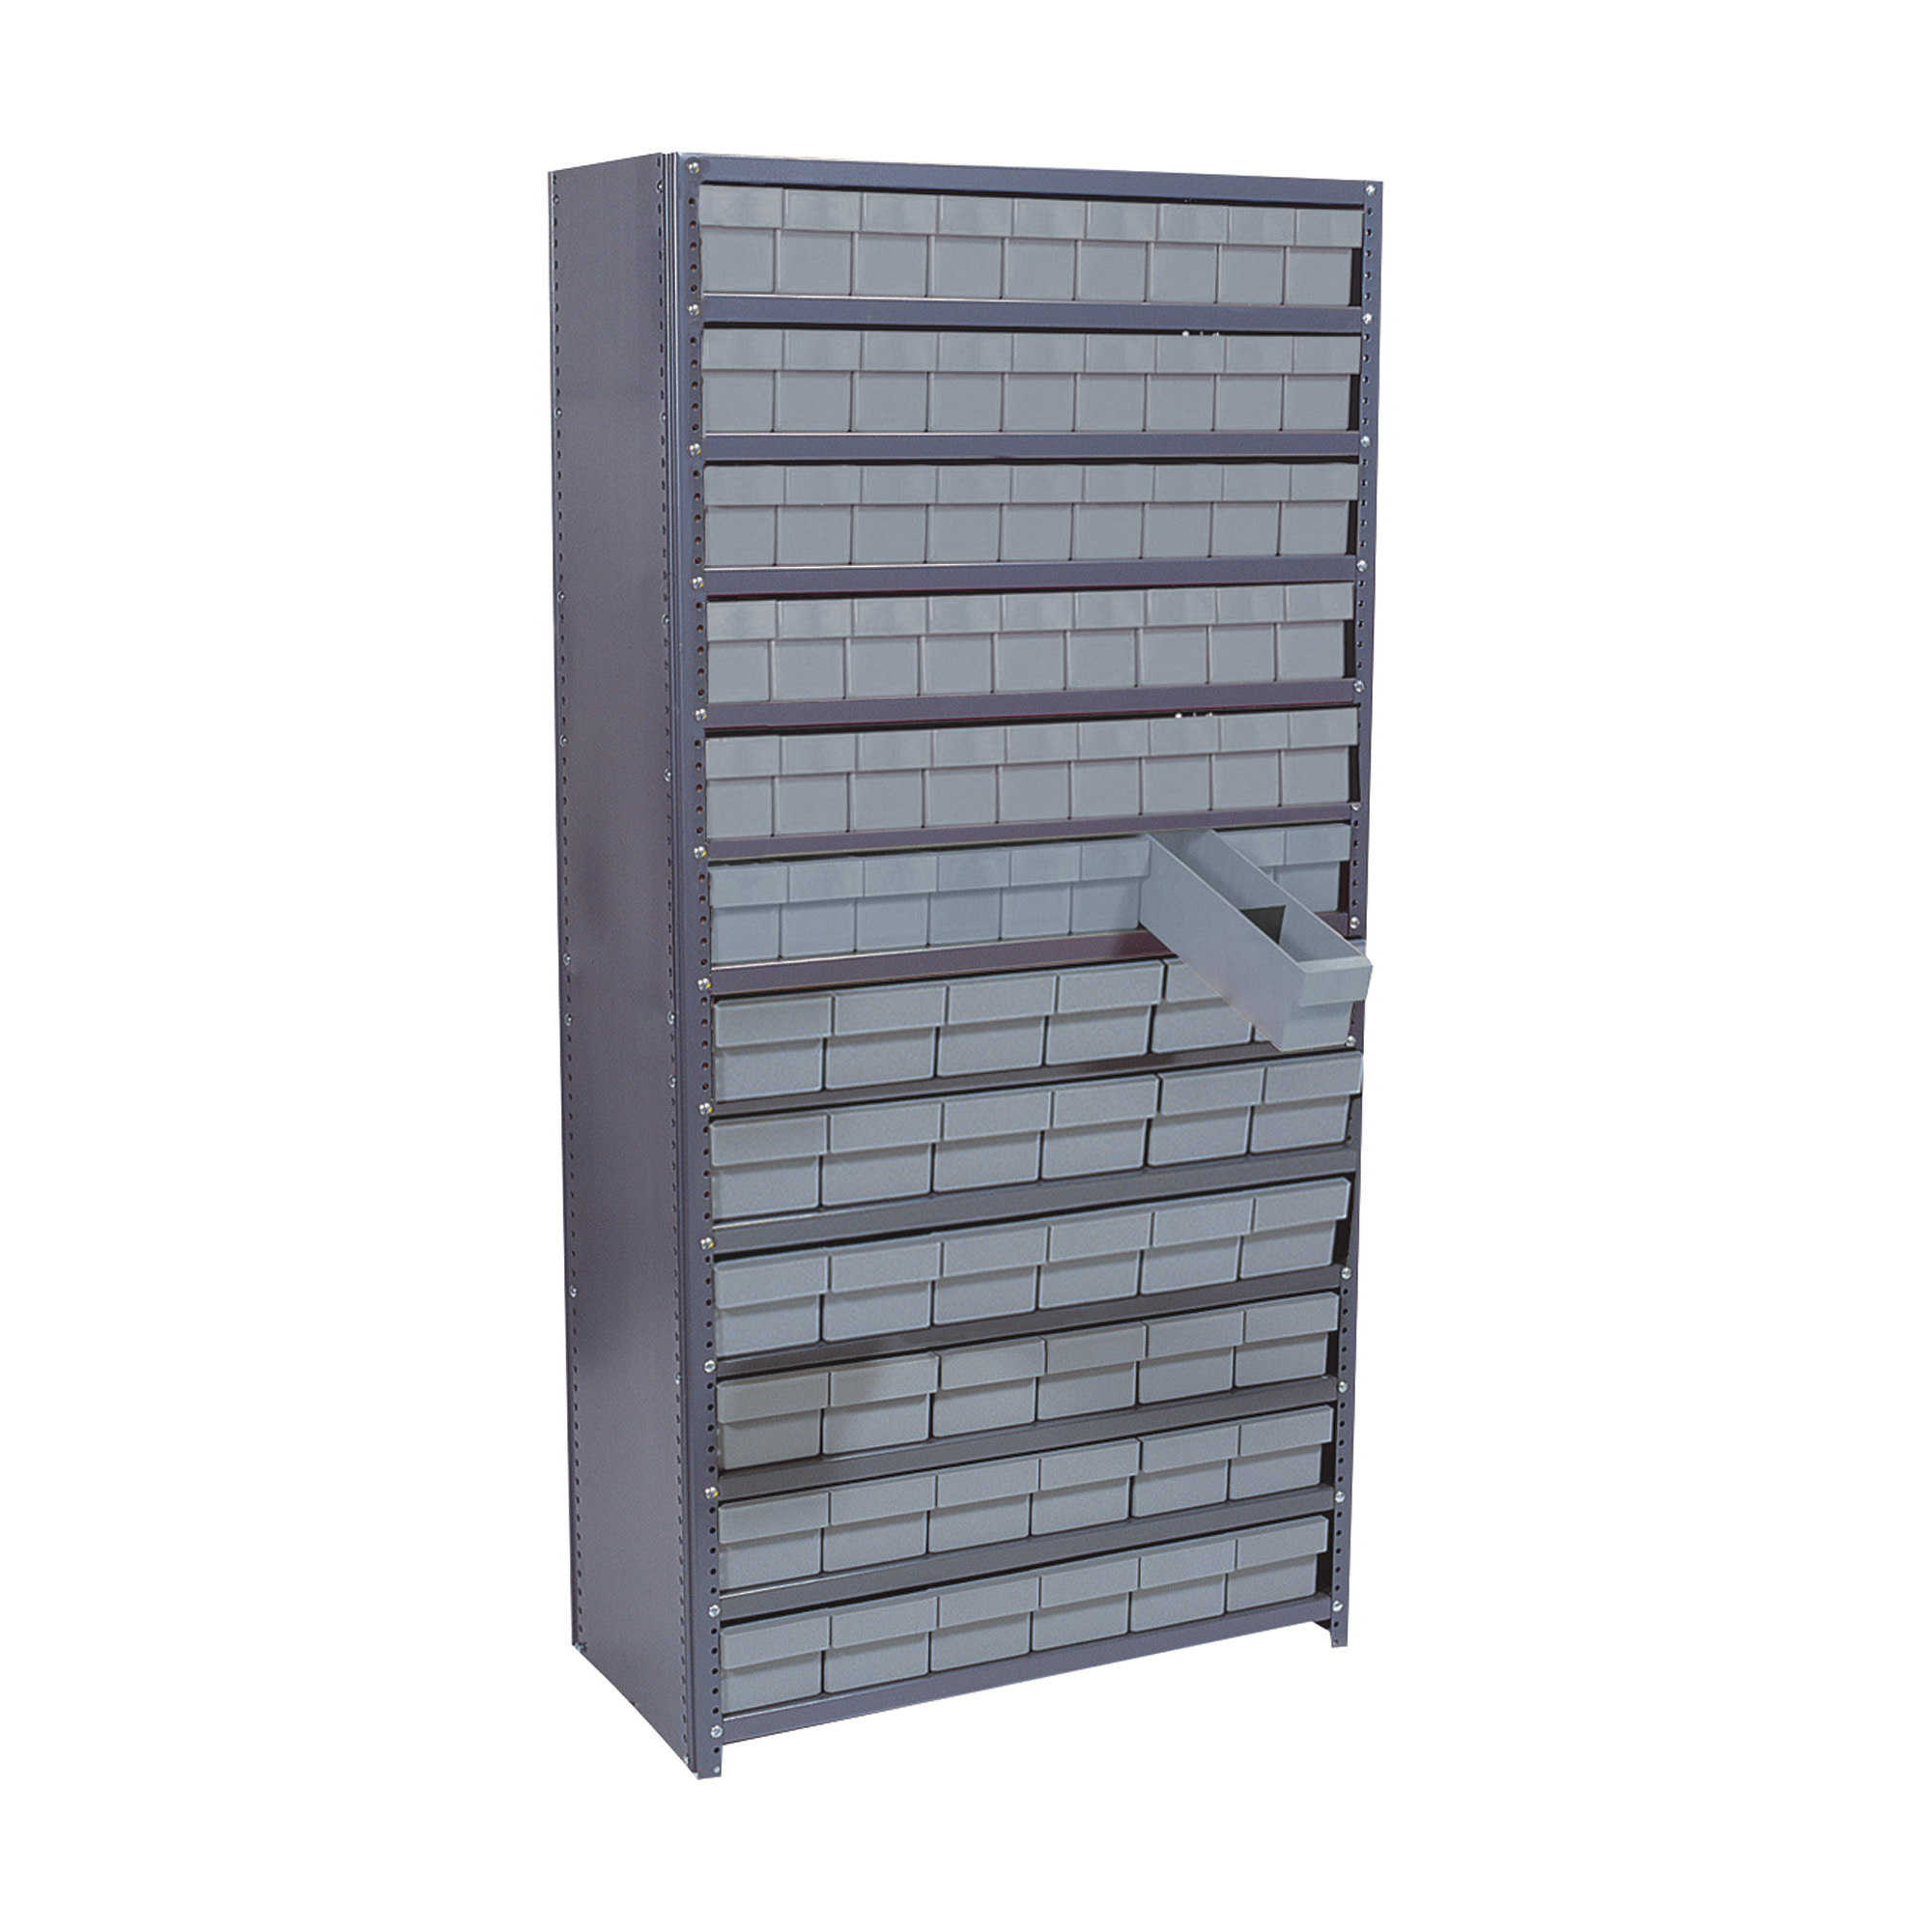 Quantum Storage Enclosed Metal Shelving Unit with 90 Super Tuff Drawers, 18Inch x 36Inch x 75Inch, Gray, Model CL1875-624GY